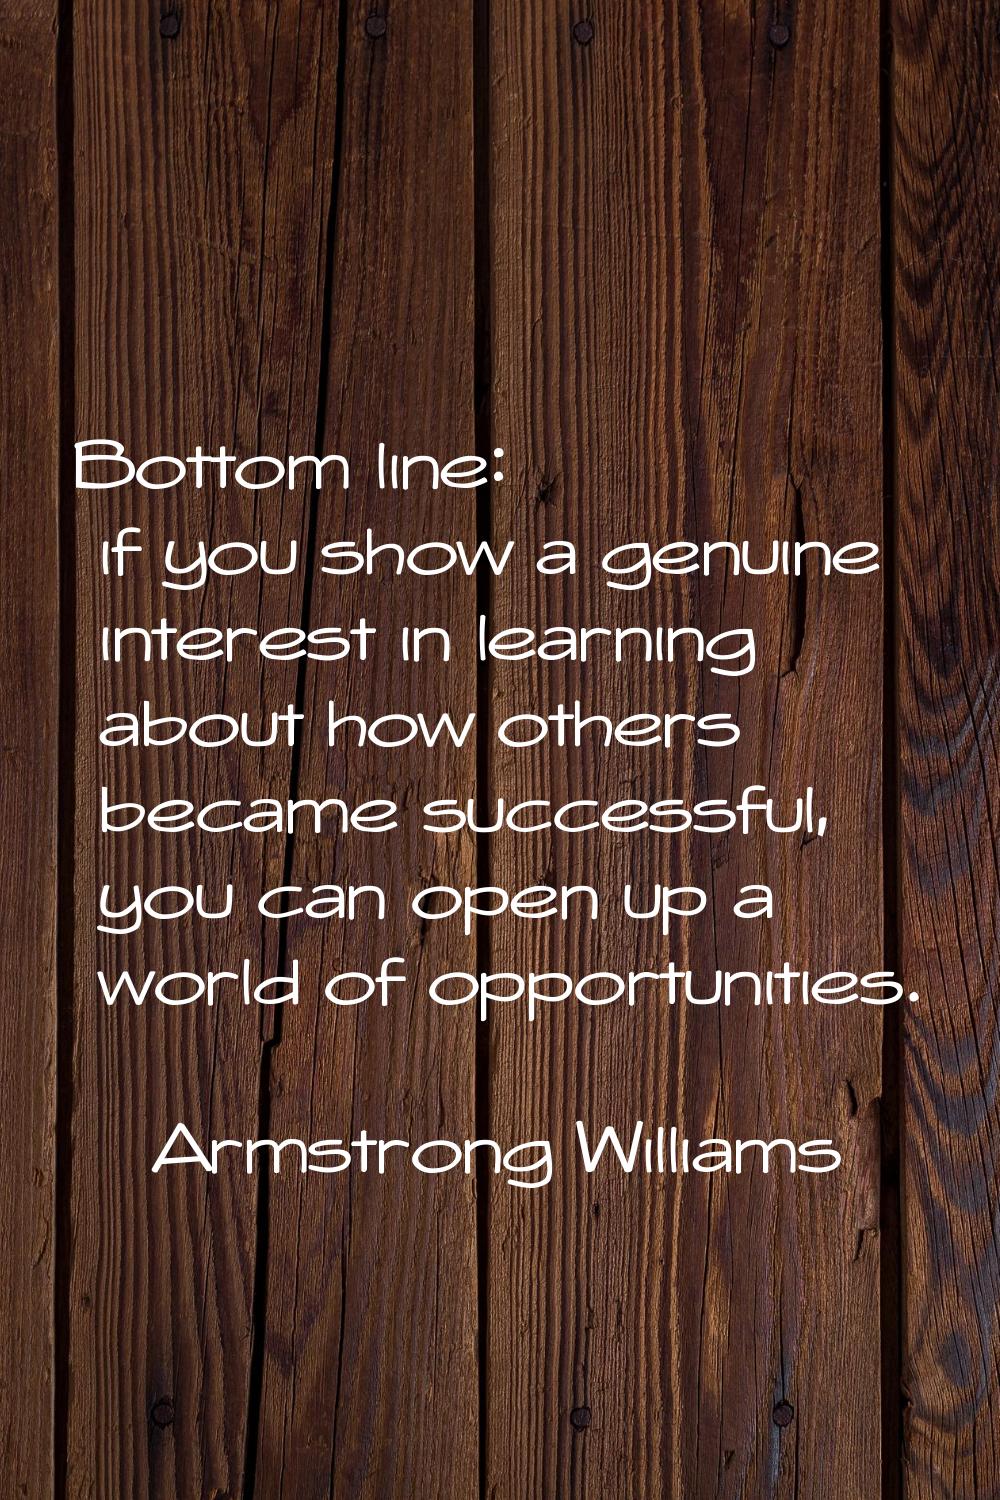 Bottom line: if you show a genuine interest in learning about how others became successful, you can